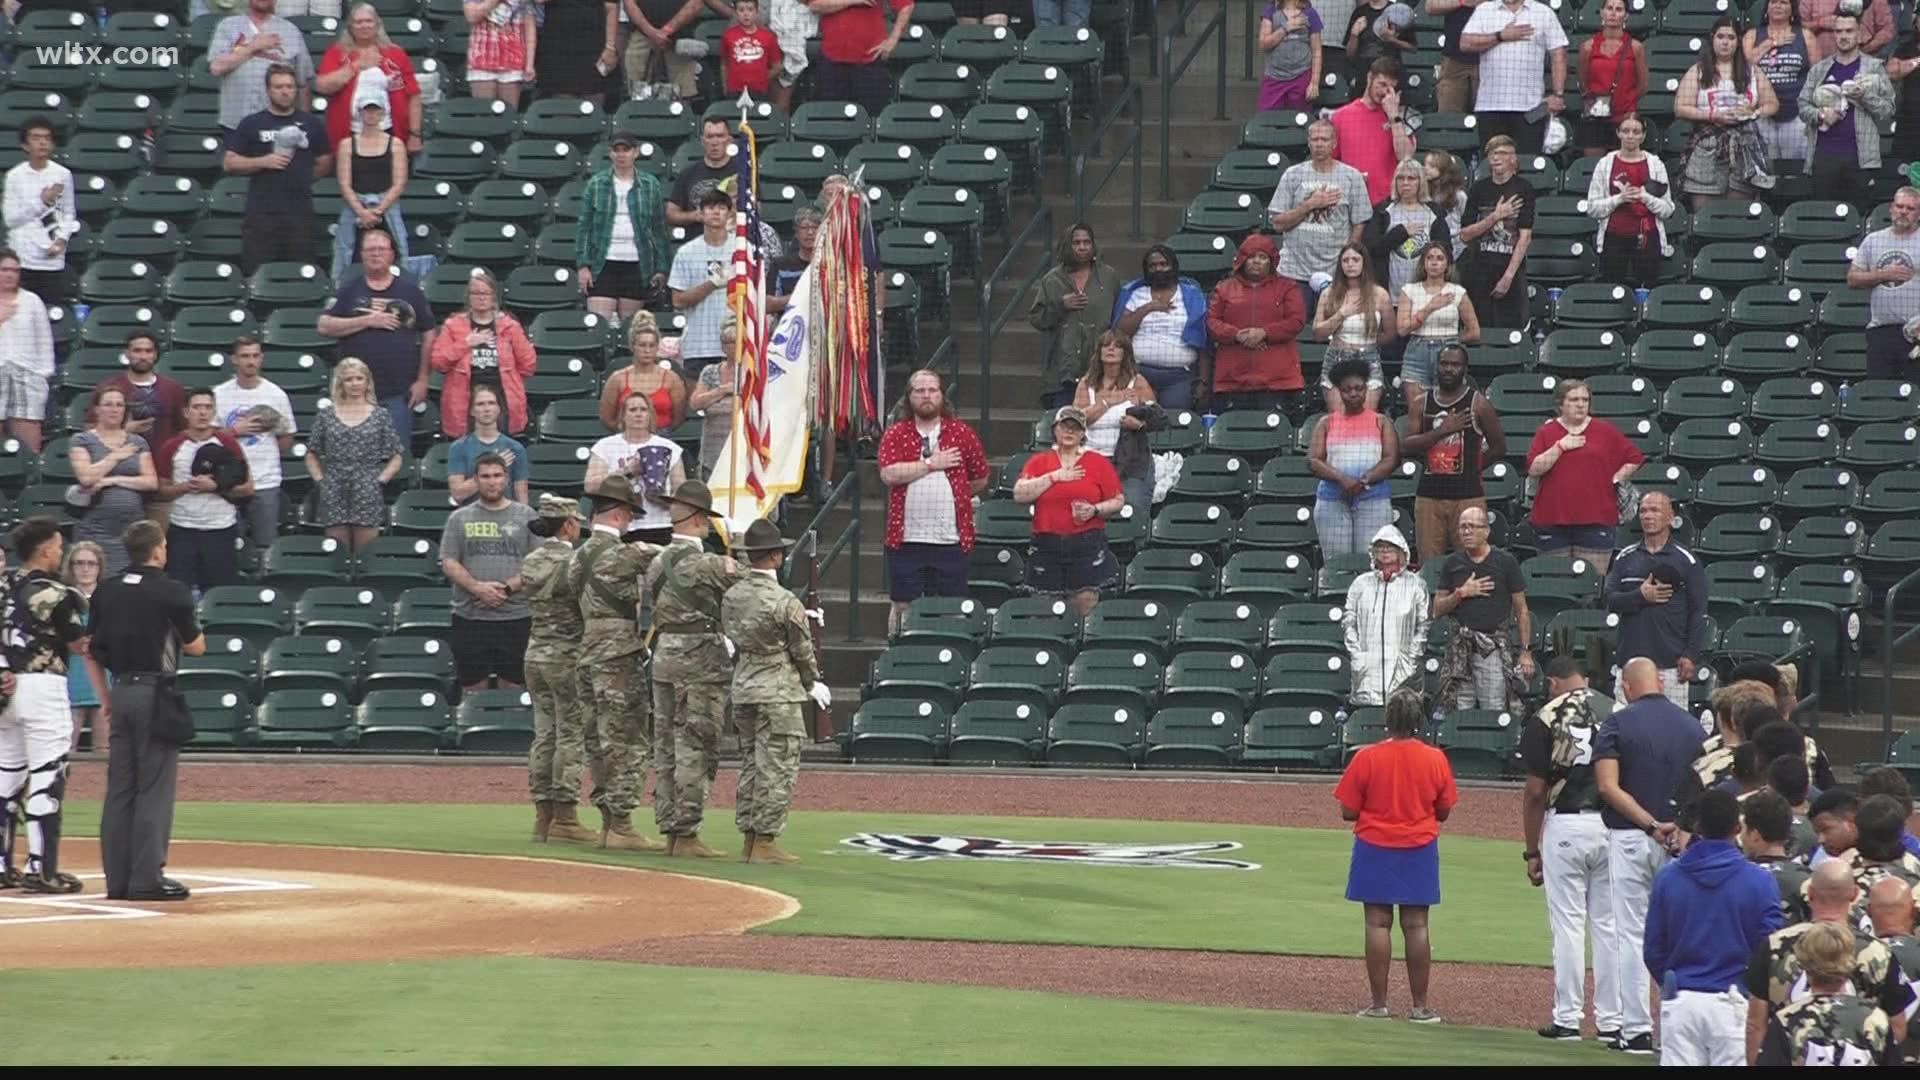 Thousands went out to the ballpark in Columbia for the July 4th celebration at Segra Park.